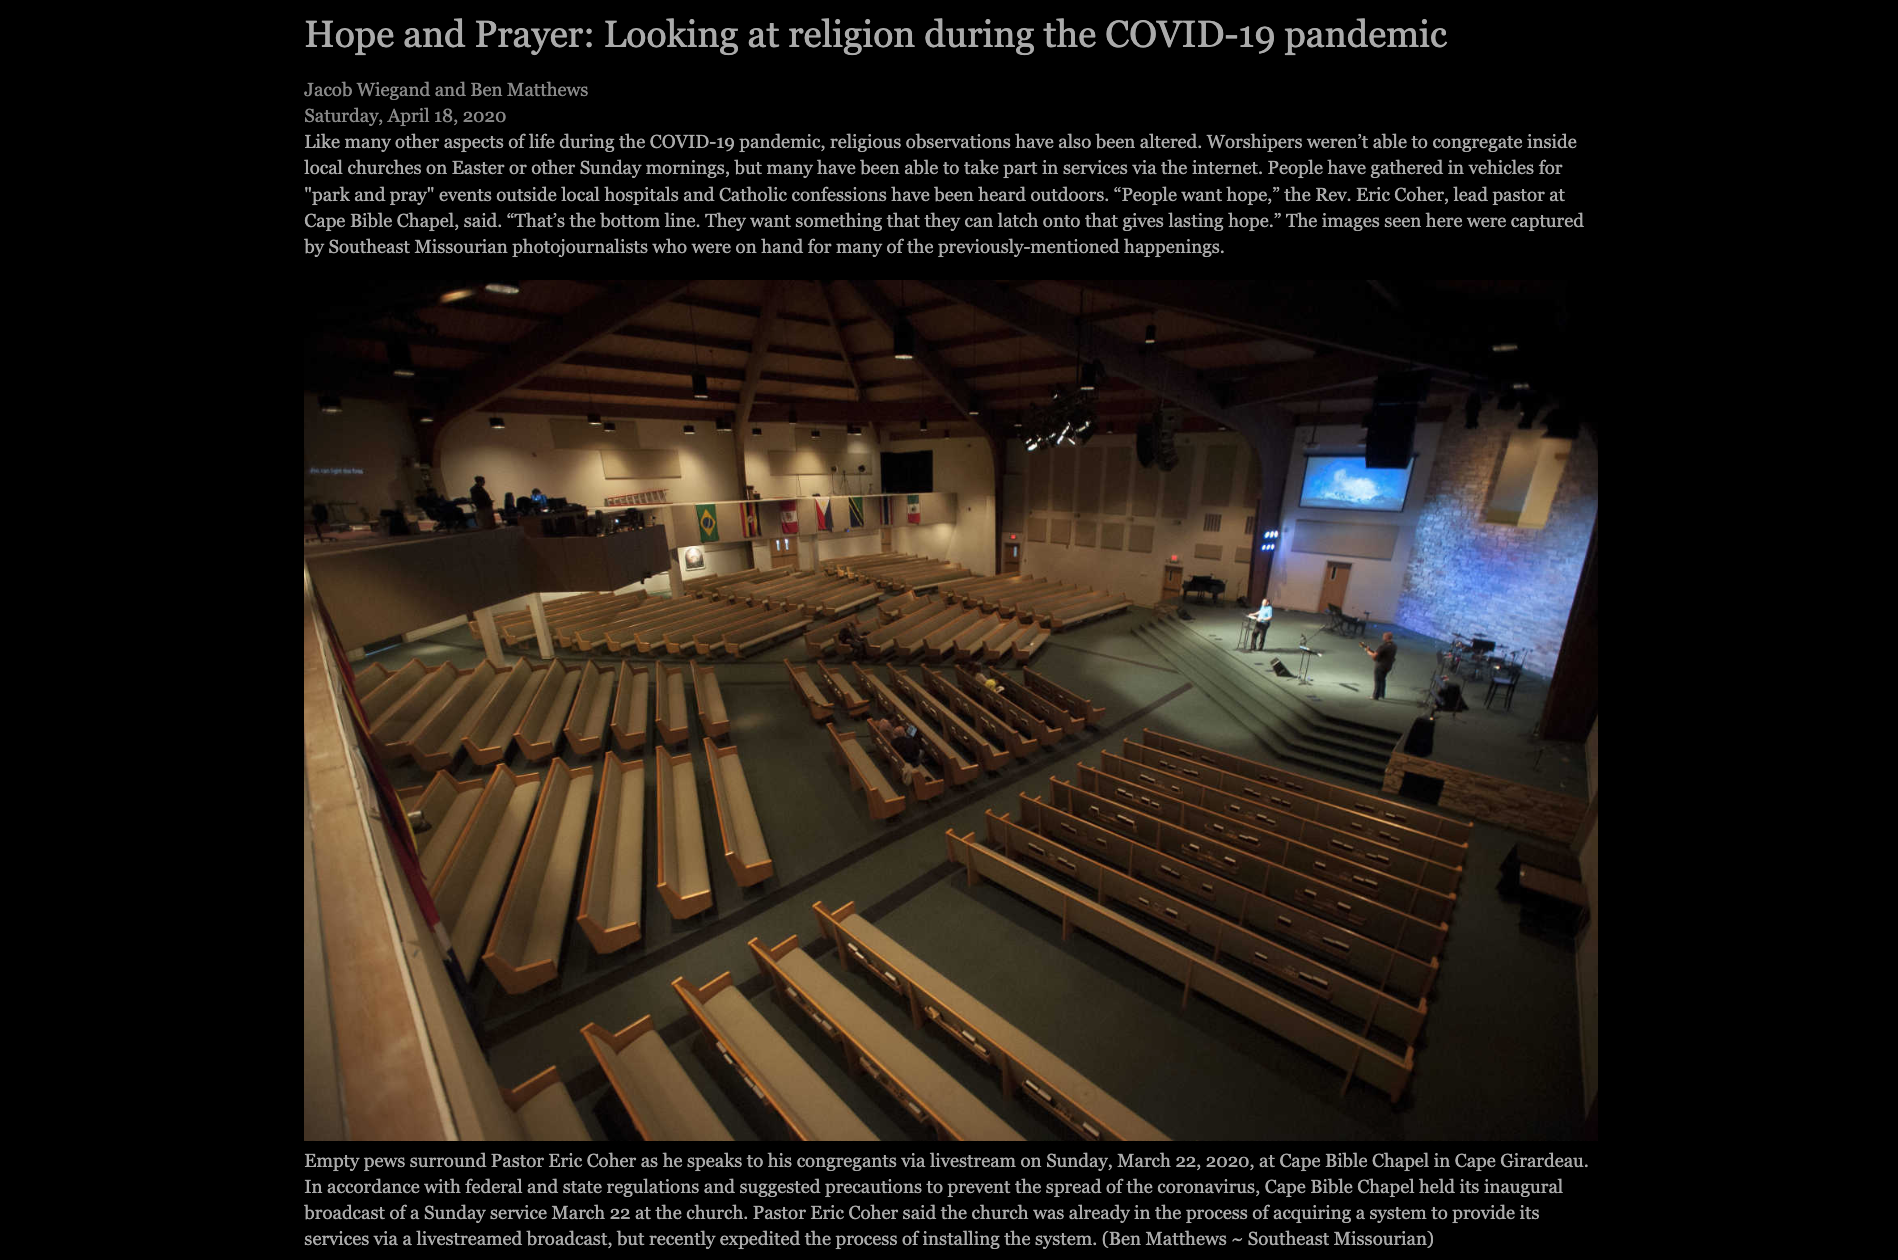     Hope and Prayer: Looking at religion during the COVID-19 pandemic gallery link    